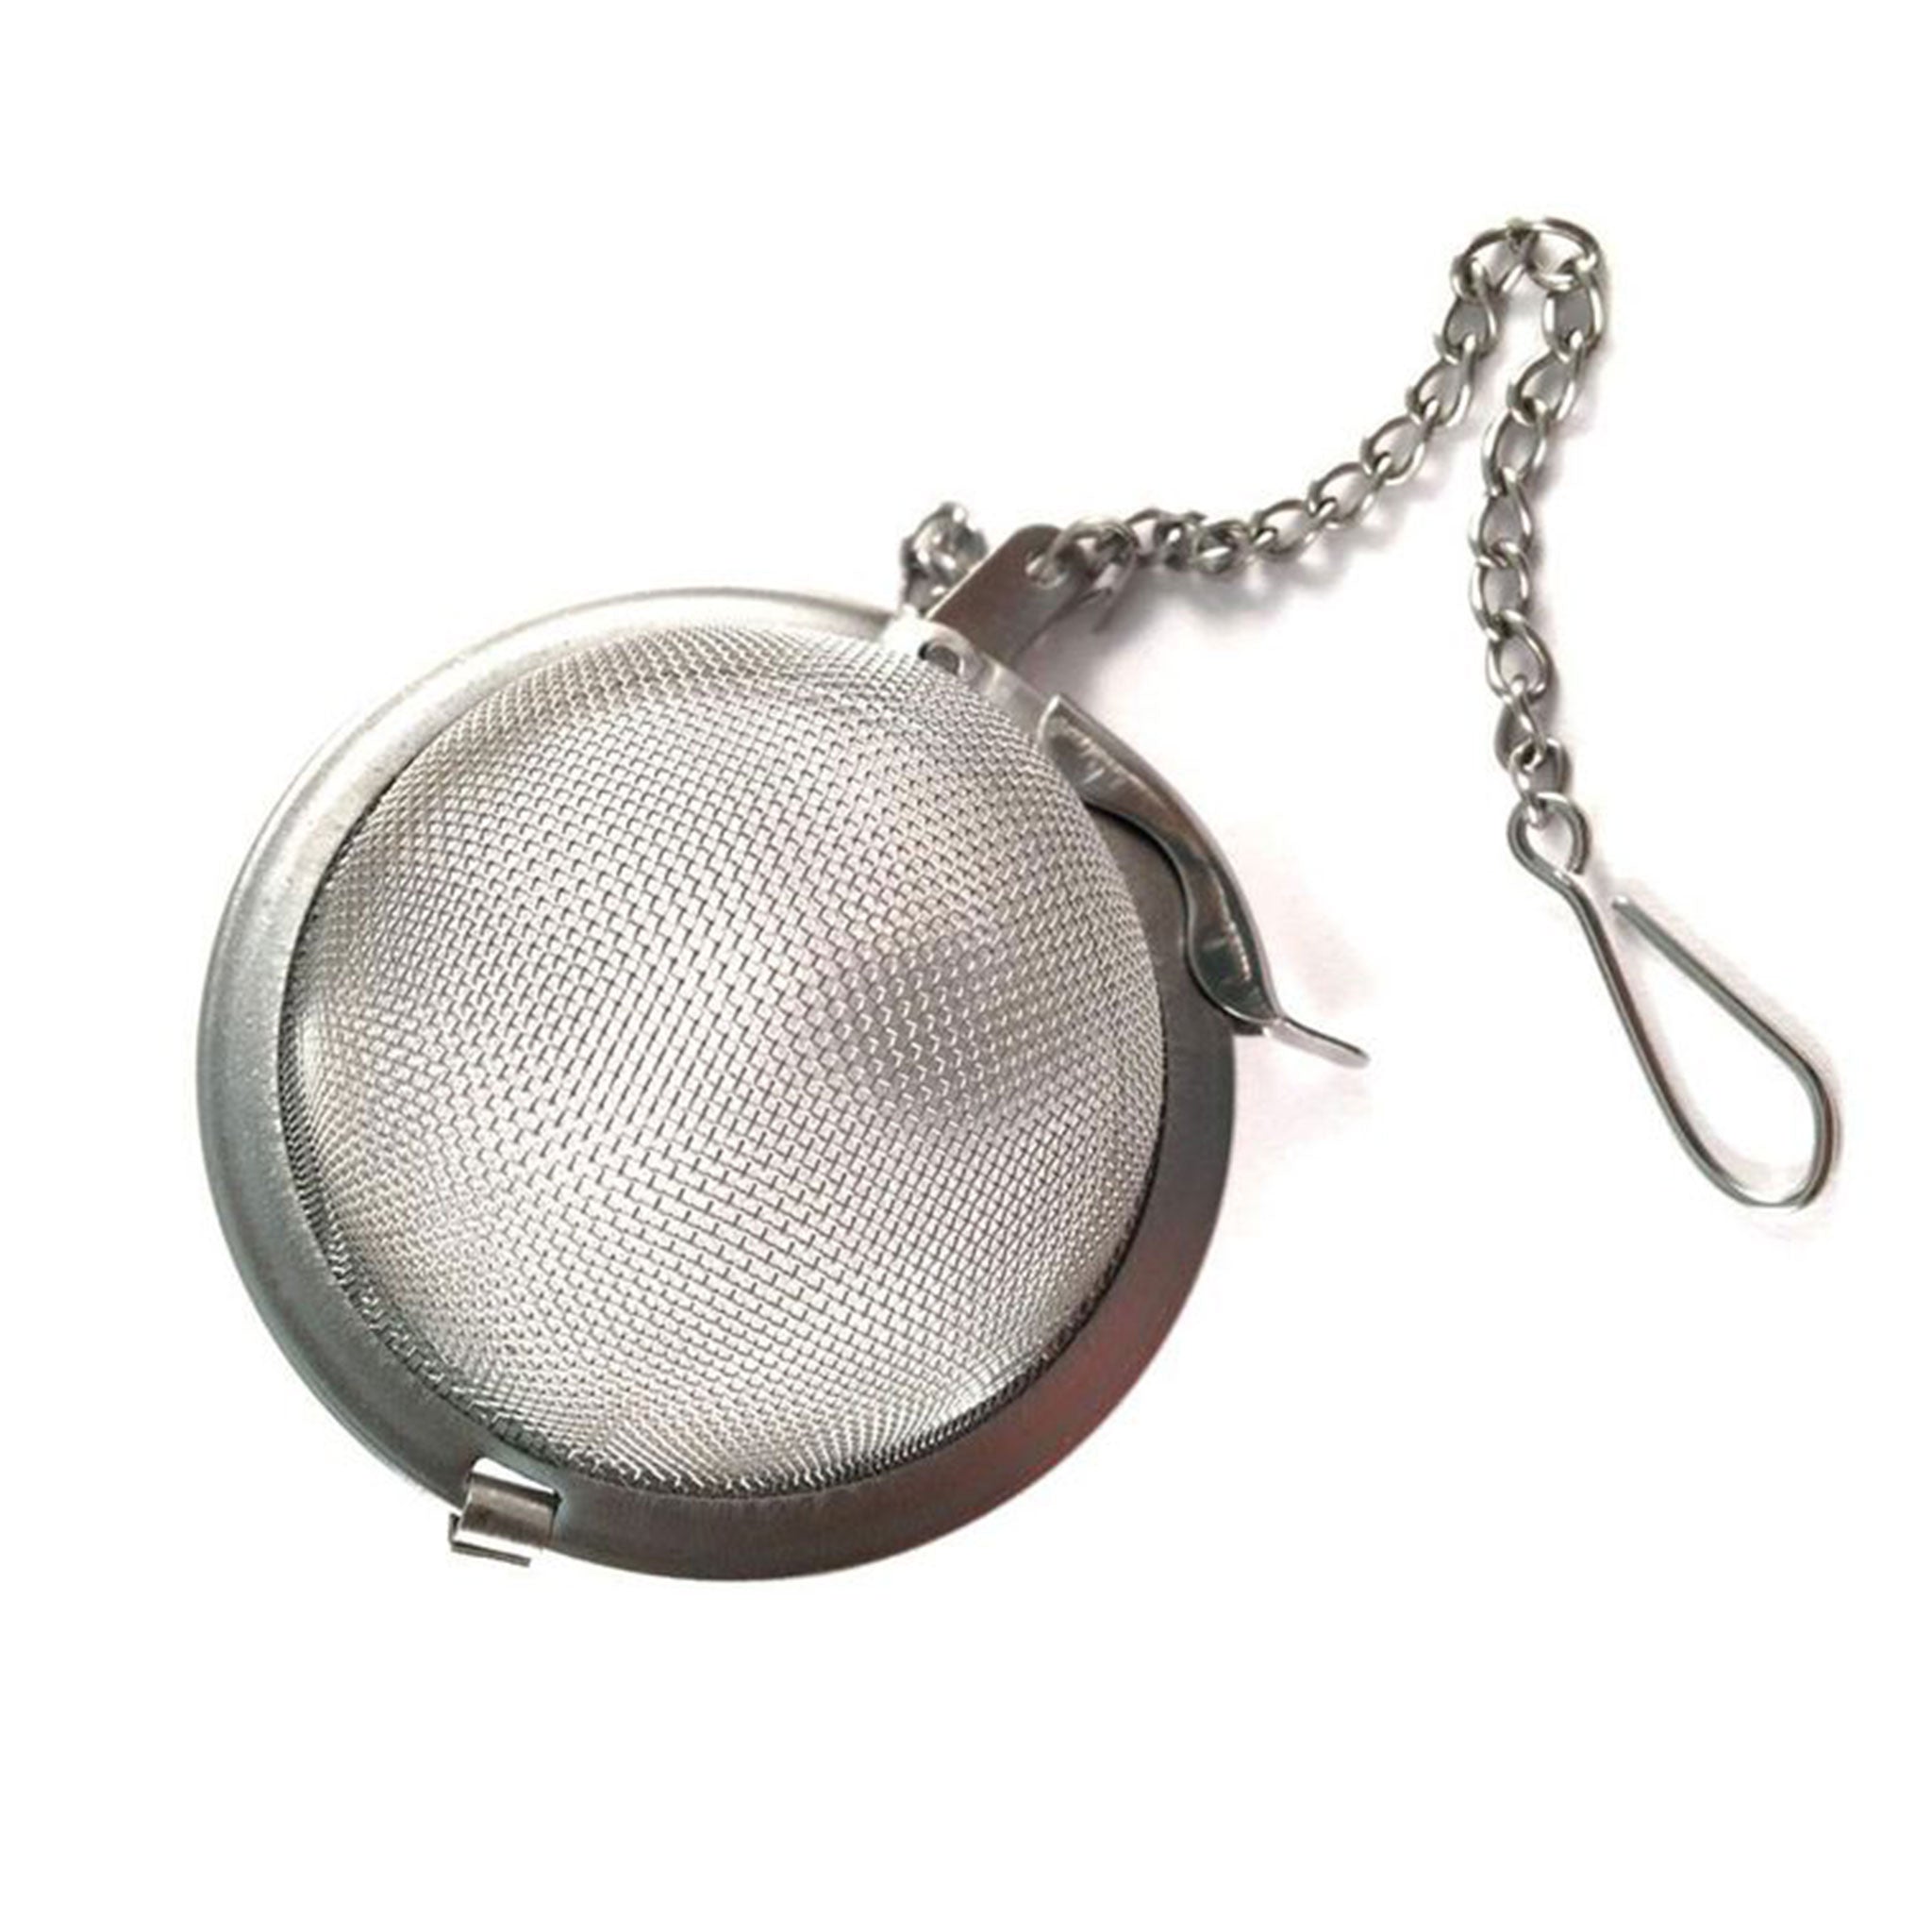 Ball Tea Infuser: Stainless Steel – Made in California